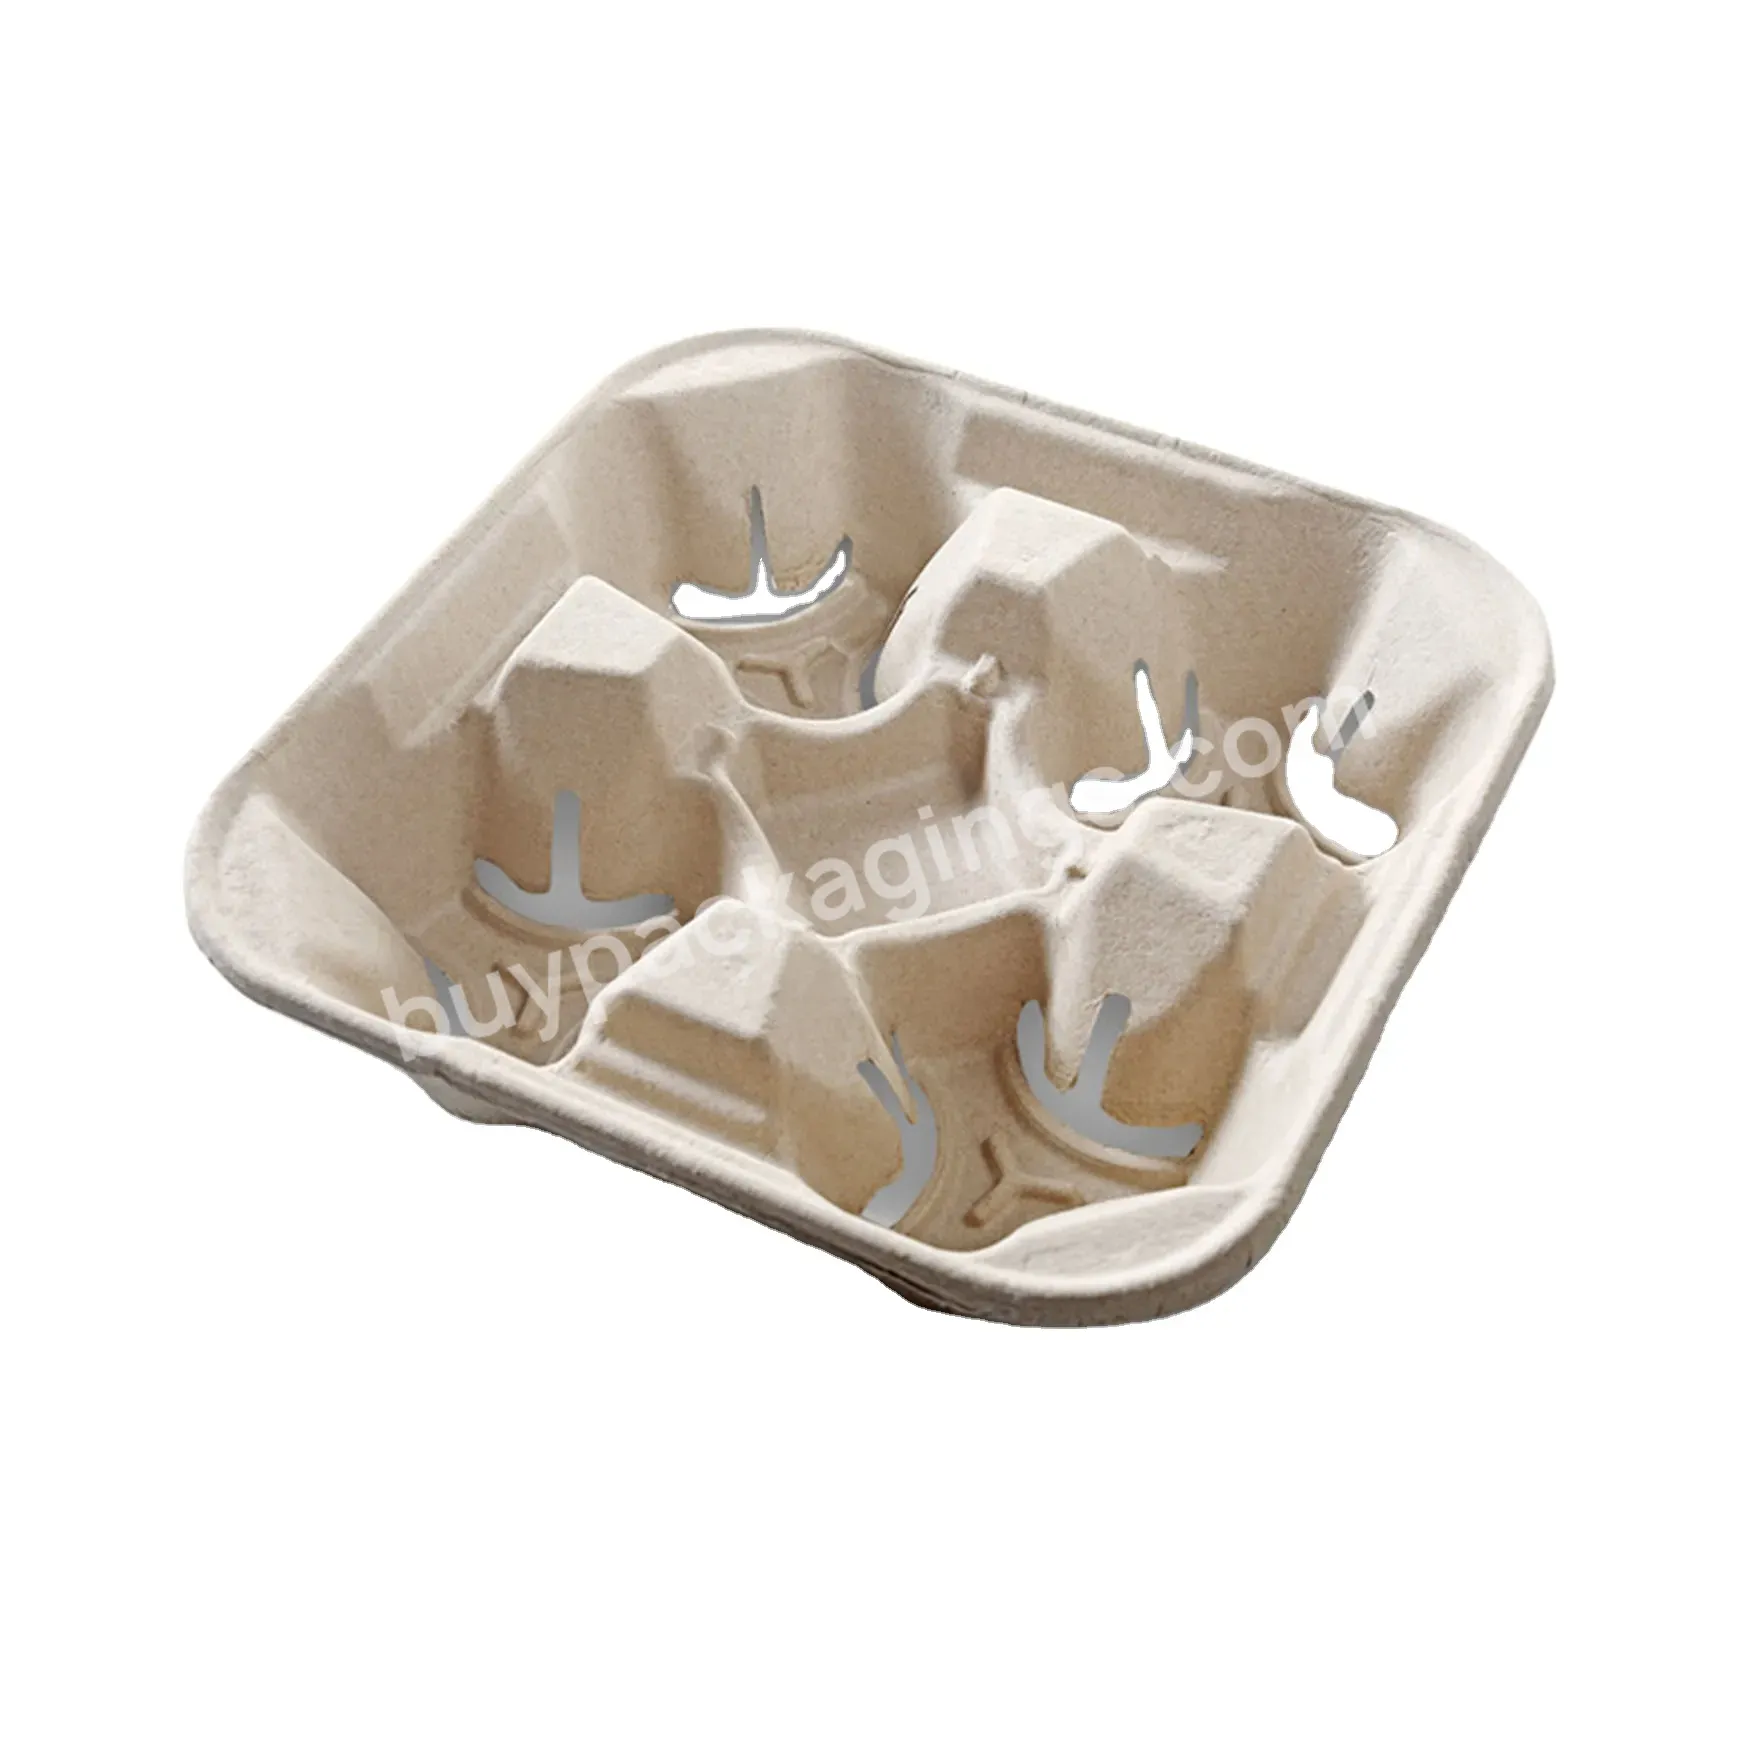 Cheap Wholesale Disposable Paper Pulp Coffee Cup Holder Biodegradable Recyclable Cup Carrier Can Be Oem Chinese Manufacturer - Buy Paper Cup Holder,Drink Carrier,Biodegradable Paper Cup Holder.